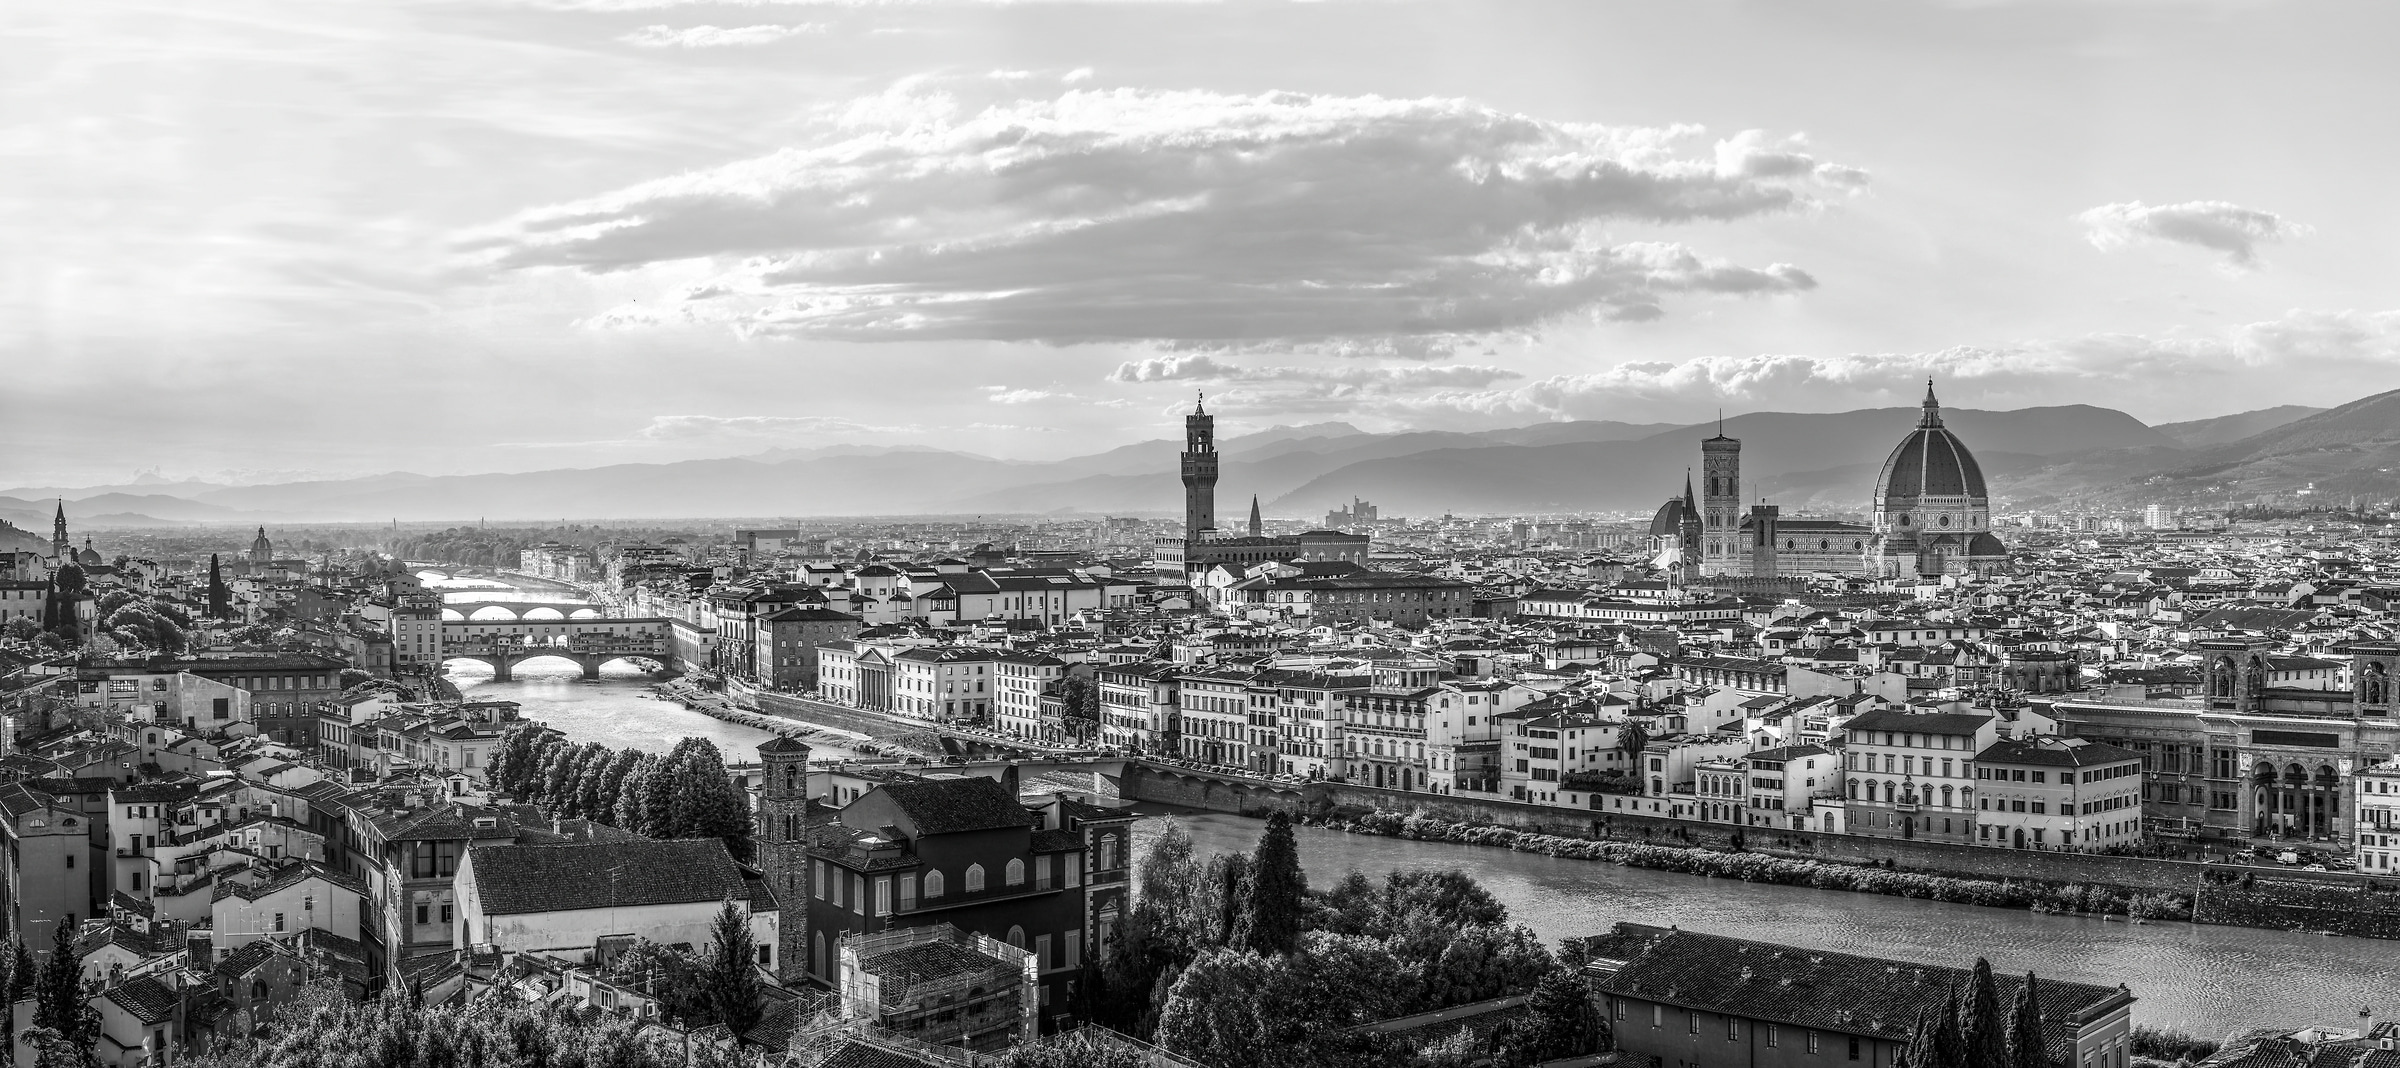 666 megapixels! A very high resolution, large-format VAST photo print of Italy; black & white photograph created by Justin Katz in Piazzale Michelangelo, Florence, Toscana, Italy.